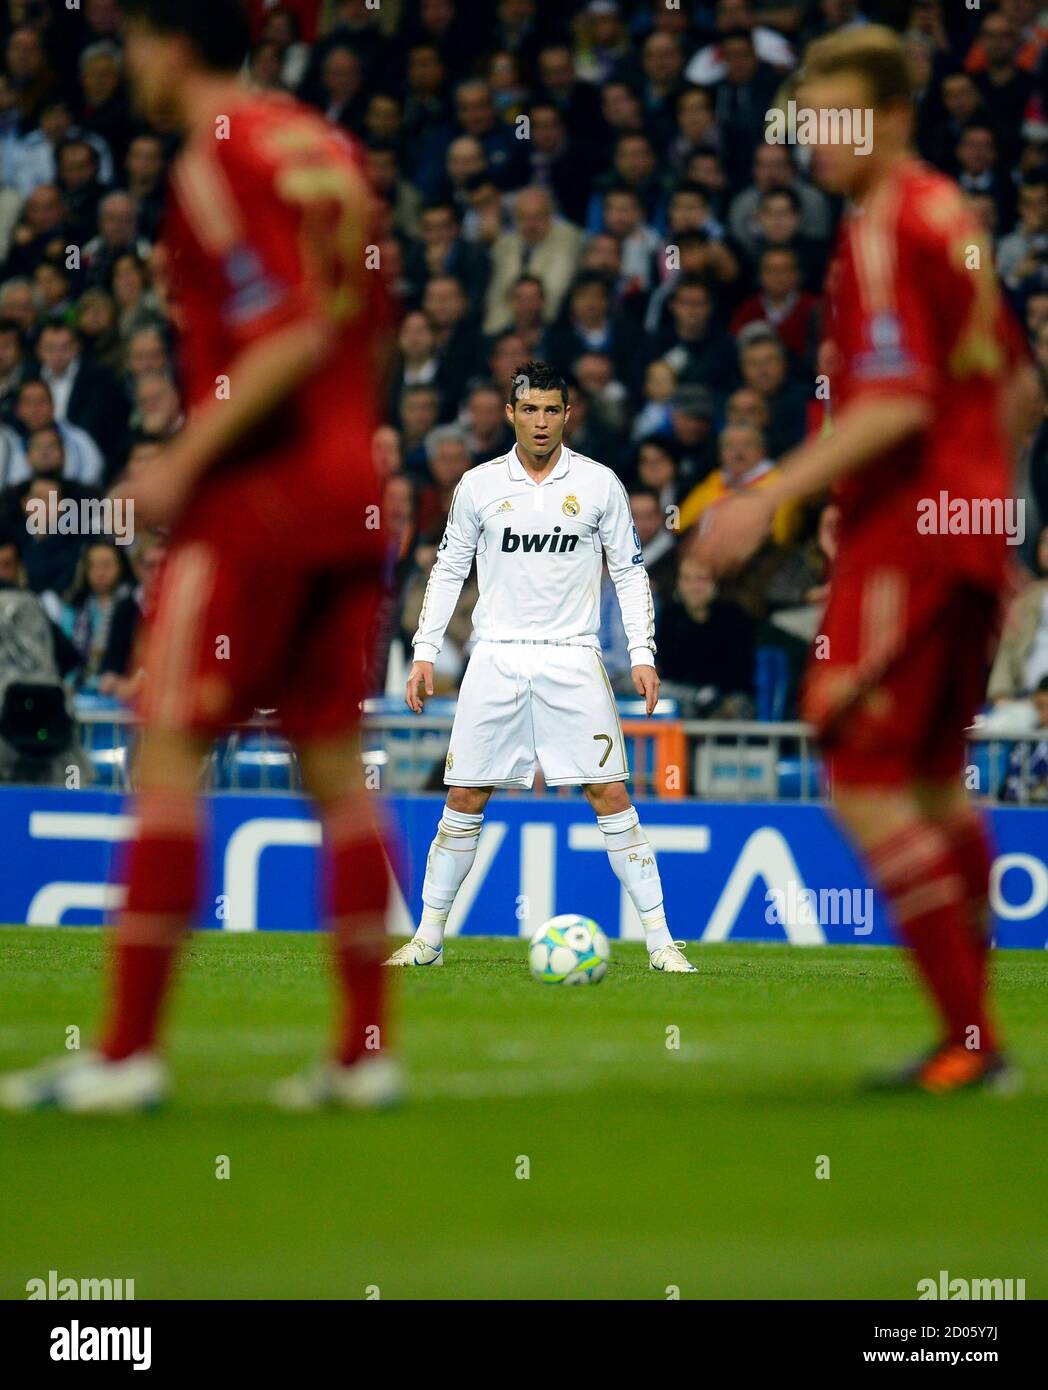 Real Madrid's Cristiano Ronaldo (C) prepares to take a free kick against Bayern  Munich during their Champions League semi-final second leg soccer match at  Santiago Bernabeu stadium in Madrid, April 25, 2012.